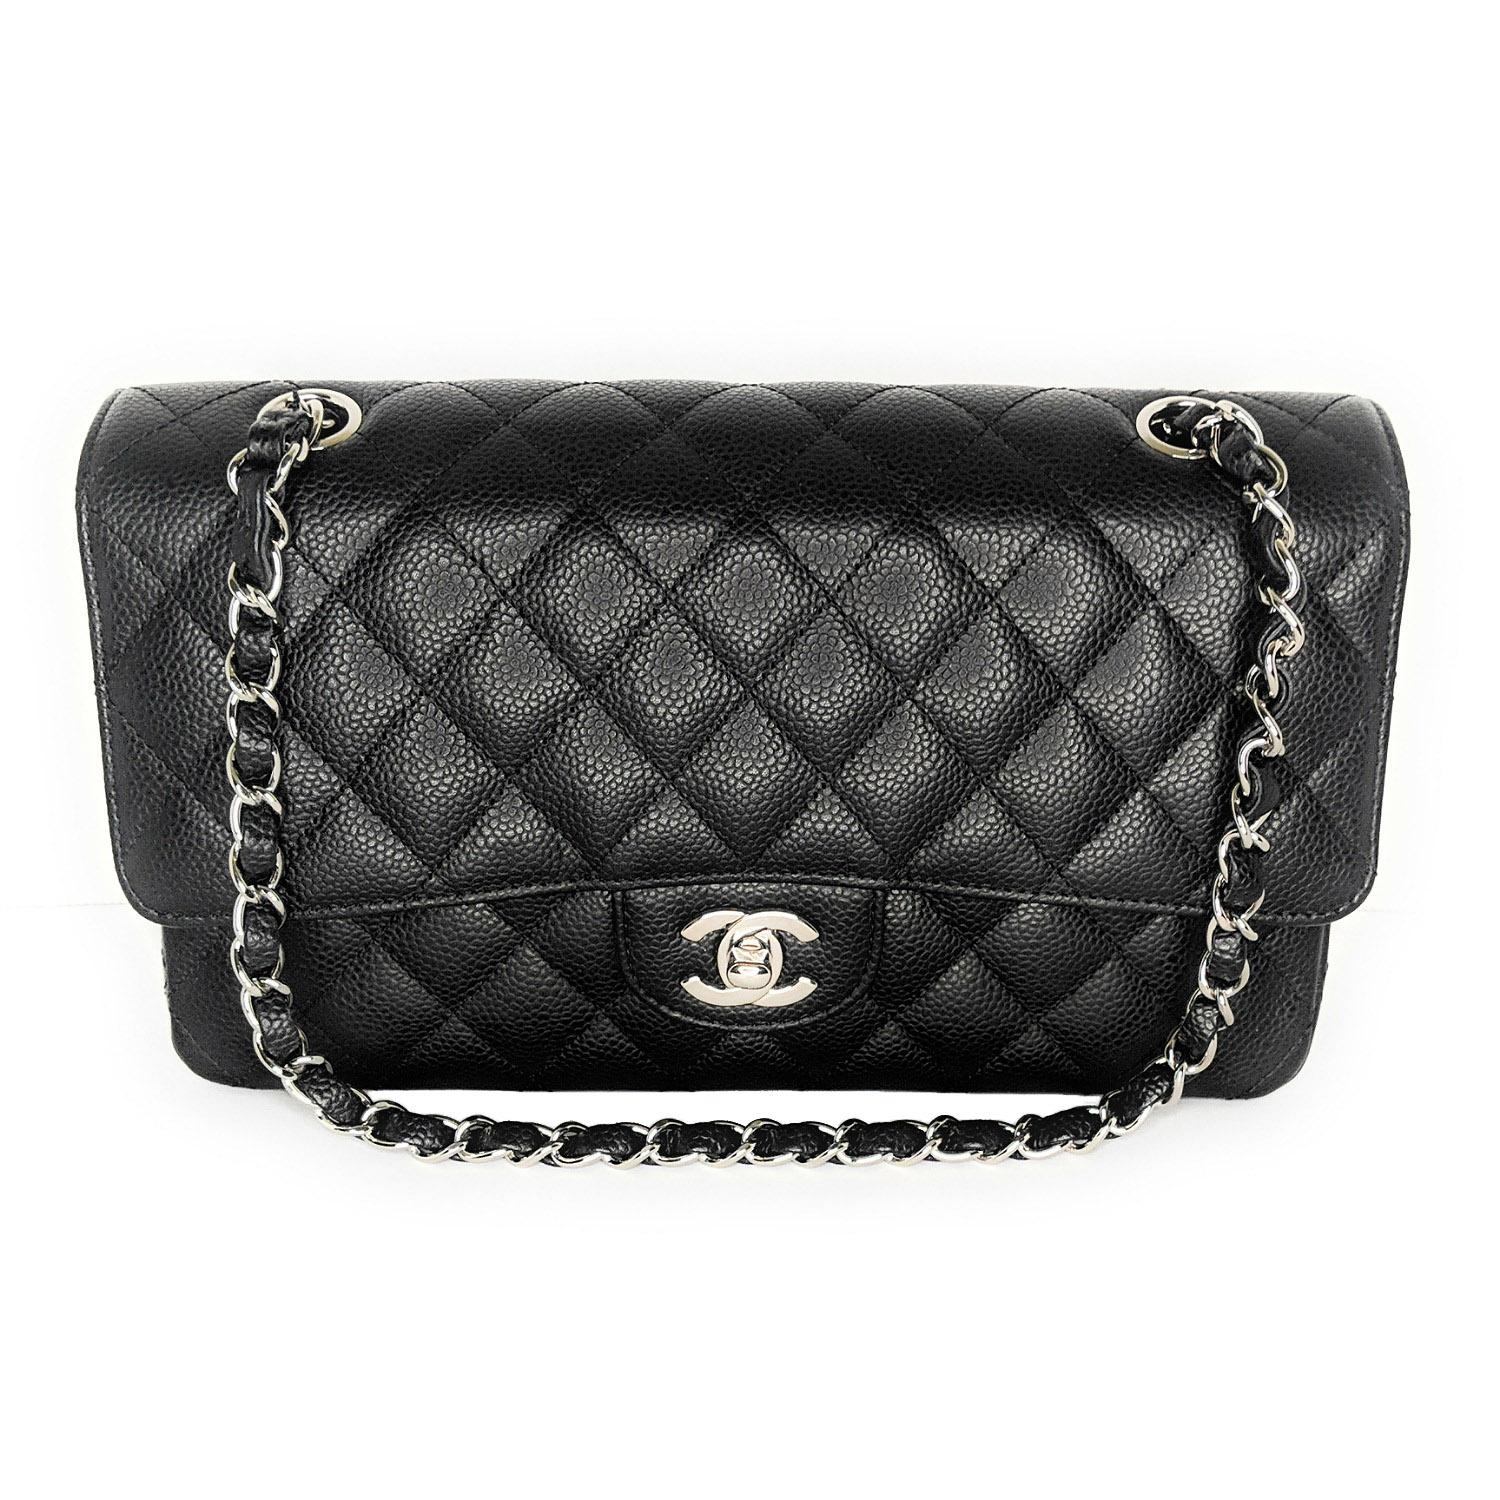 This shoulder bag is crafted of luxurious diamond-quilted caviar leather in black. The bag features a rear patch pocket, a leather-threaded polished silver chain link shoulder strap, and a matching silver classic CC turn lock on the crossover flap.